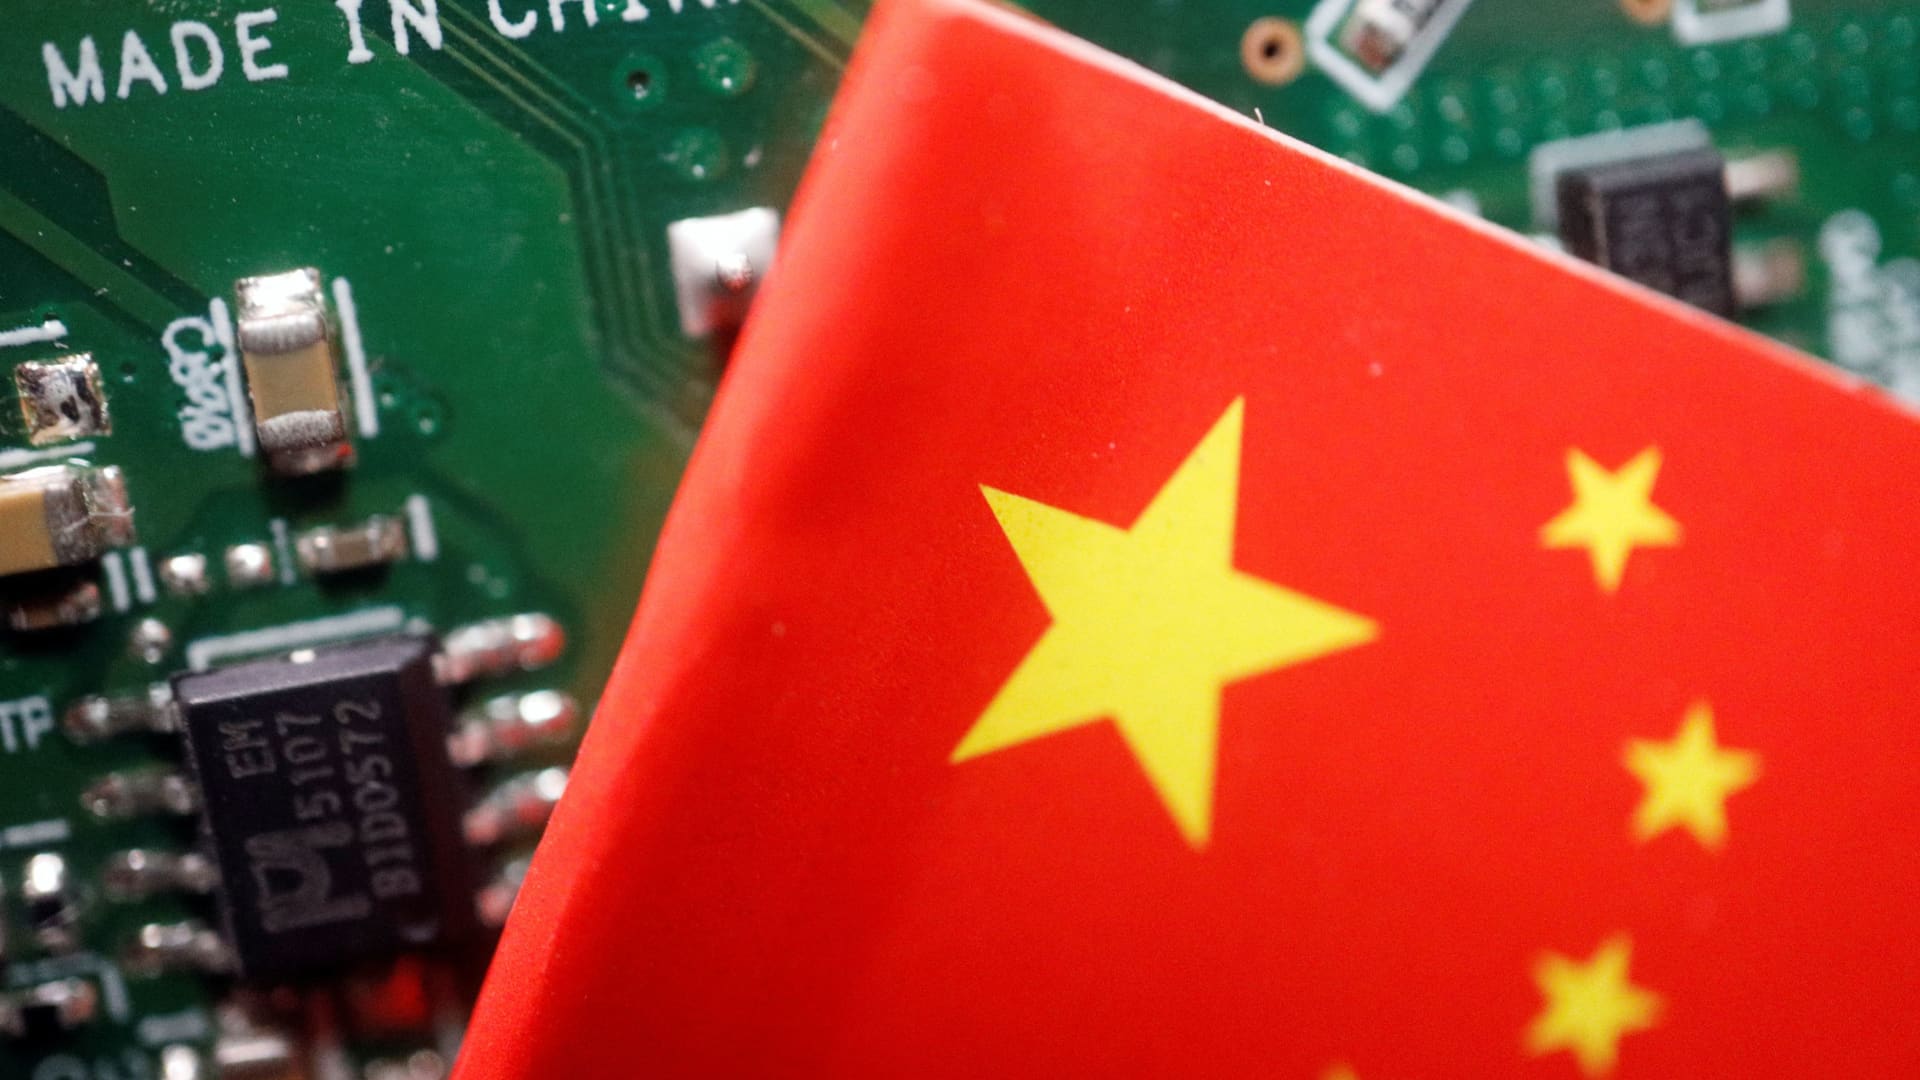 China’s chip equipment firms see revenue surge as Beijing seeks semiconductor self-reliance